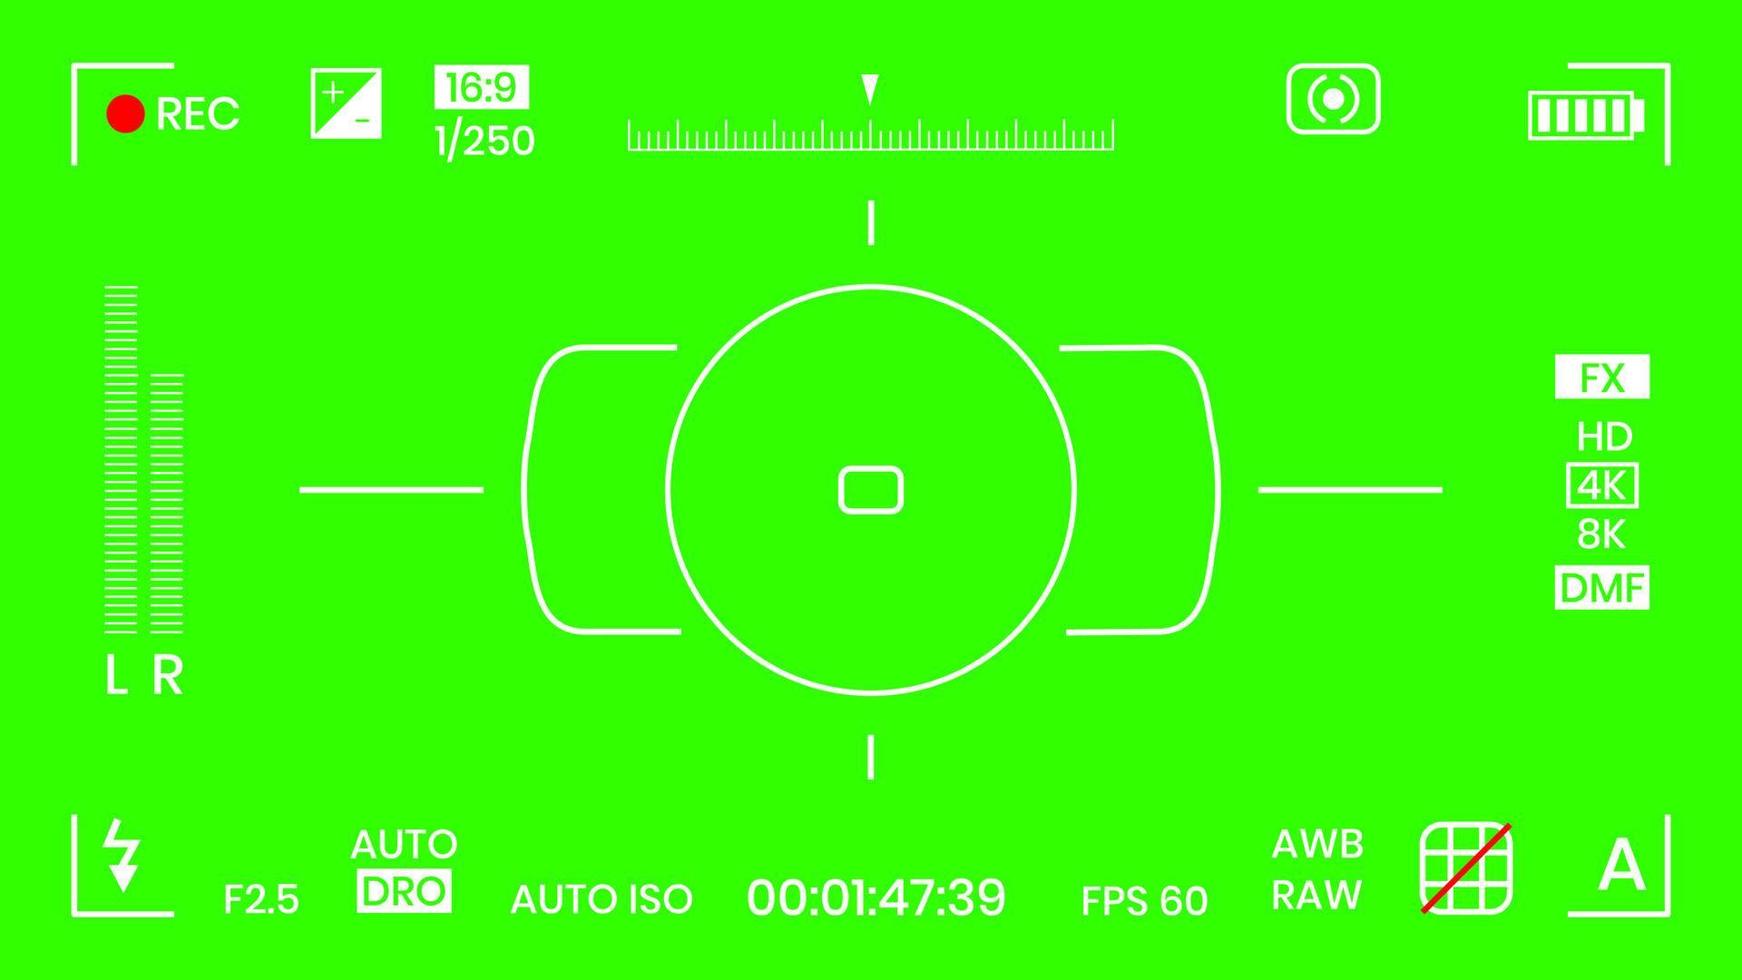 Green colored chroma key camera rec frame viewfinder overlay background screen flat style design vector illustration. Chroma key VFX screen camera overlay abstract background concept for video footage